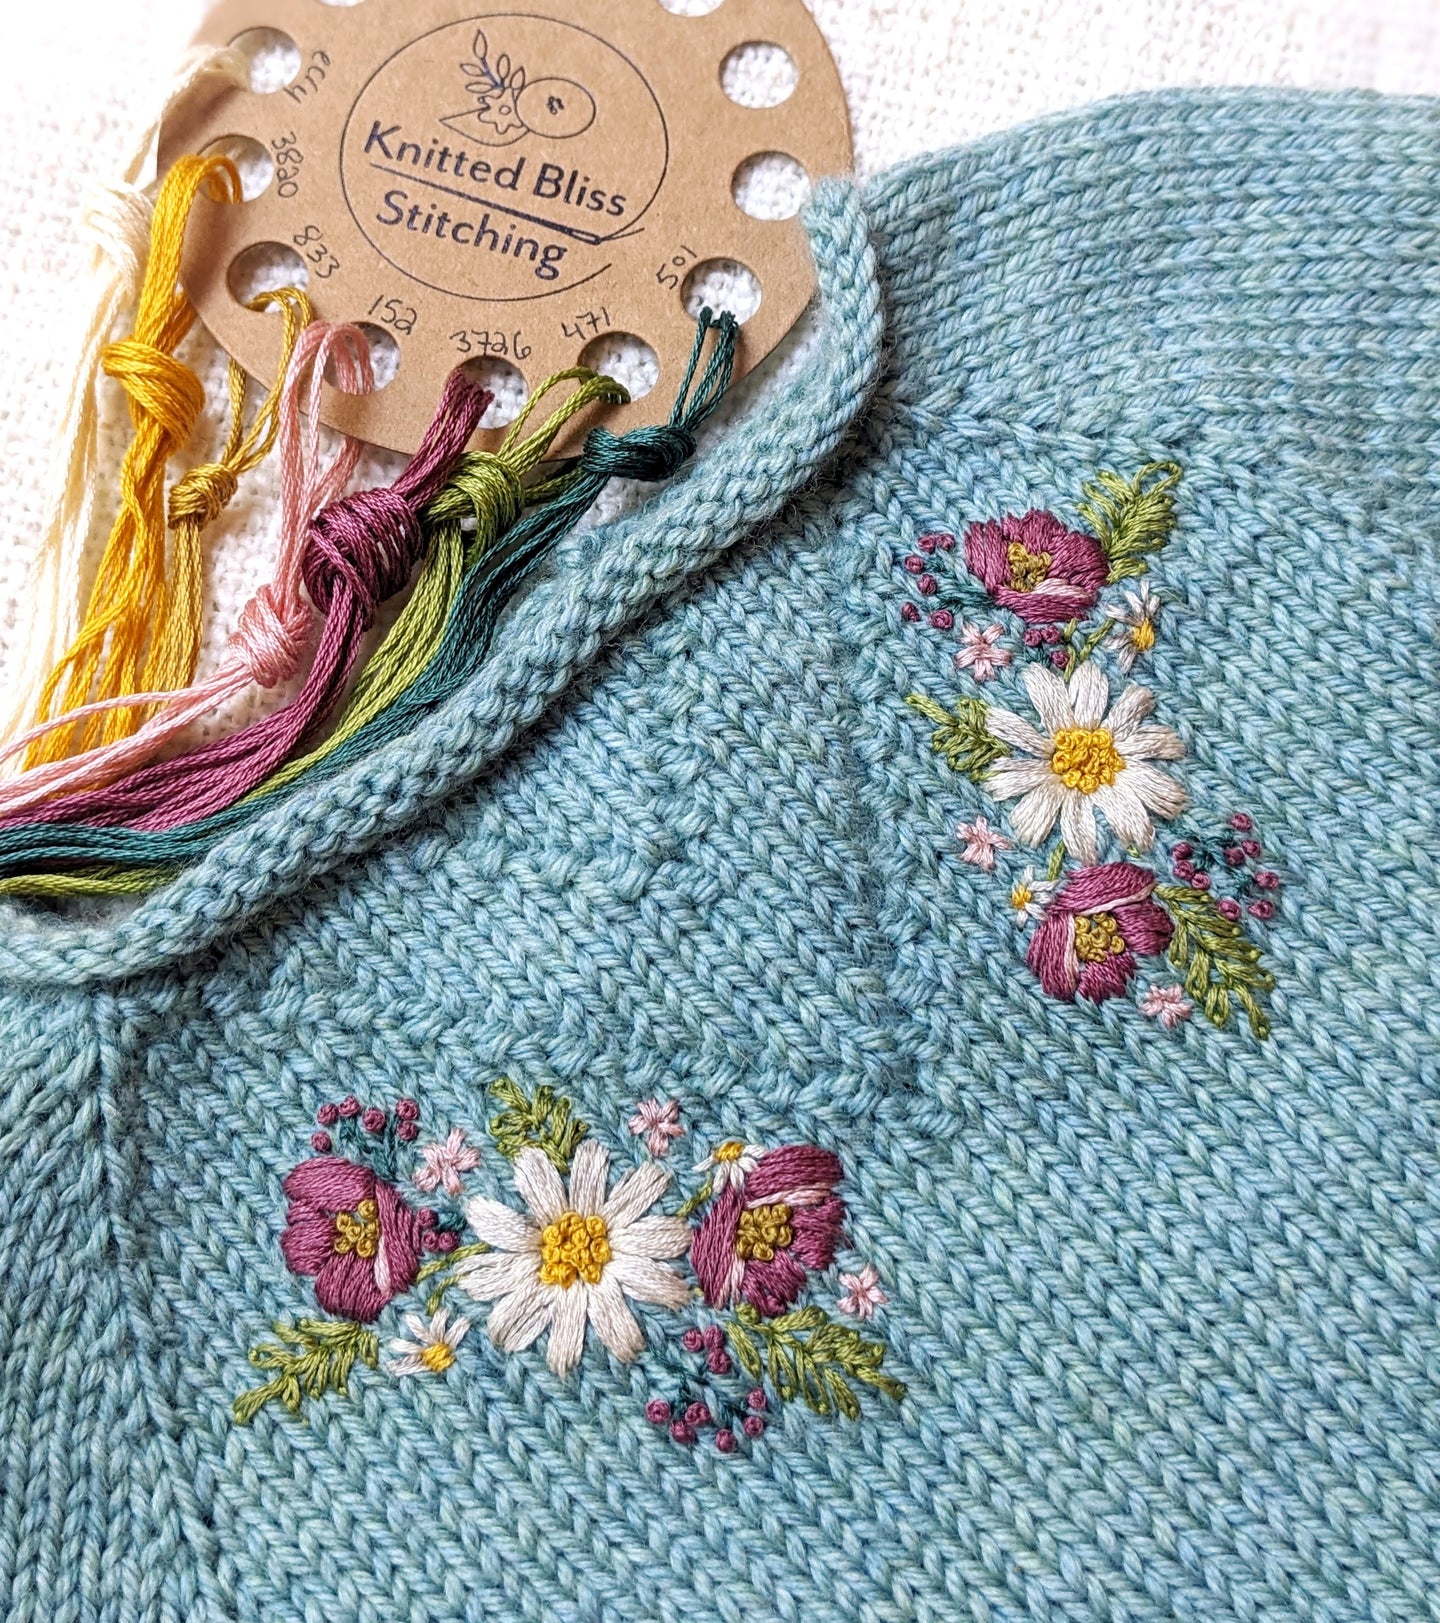 Embroider Your Knits Stick & Stitch pack